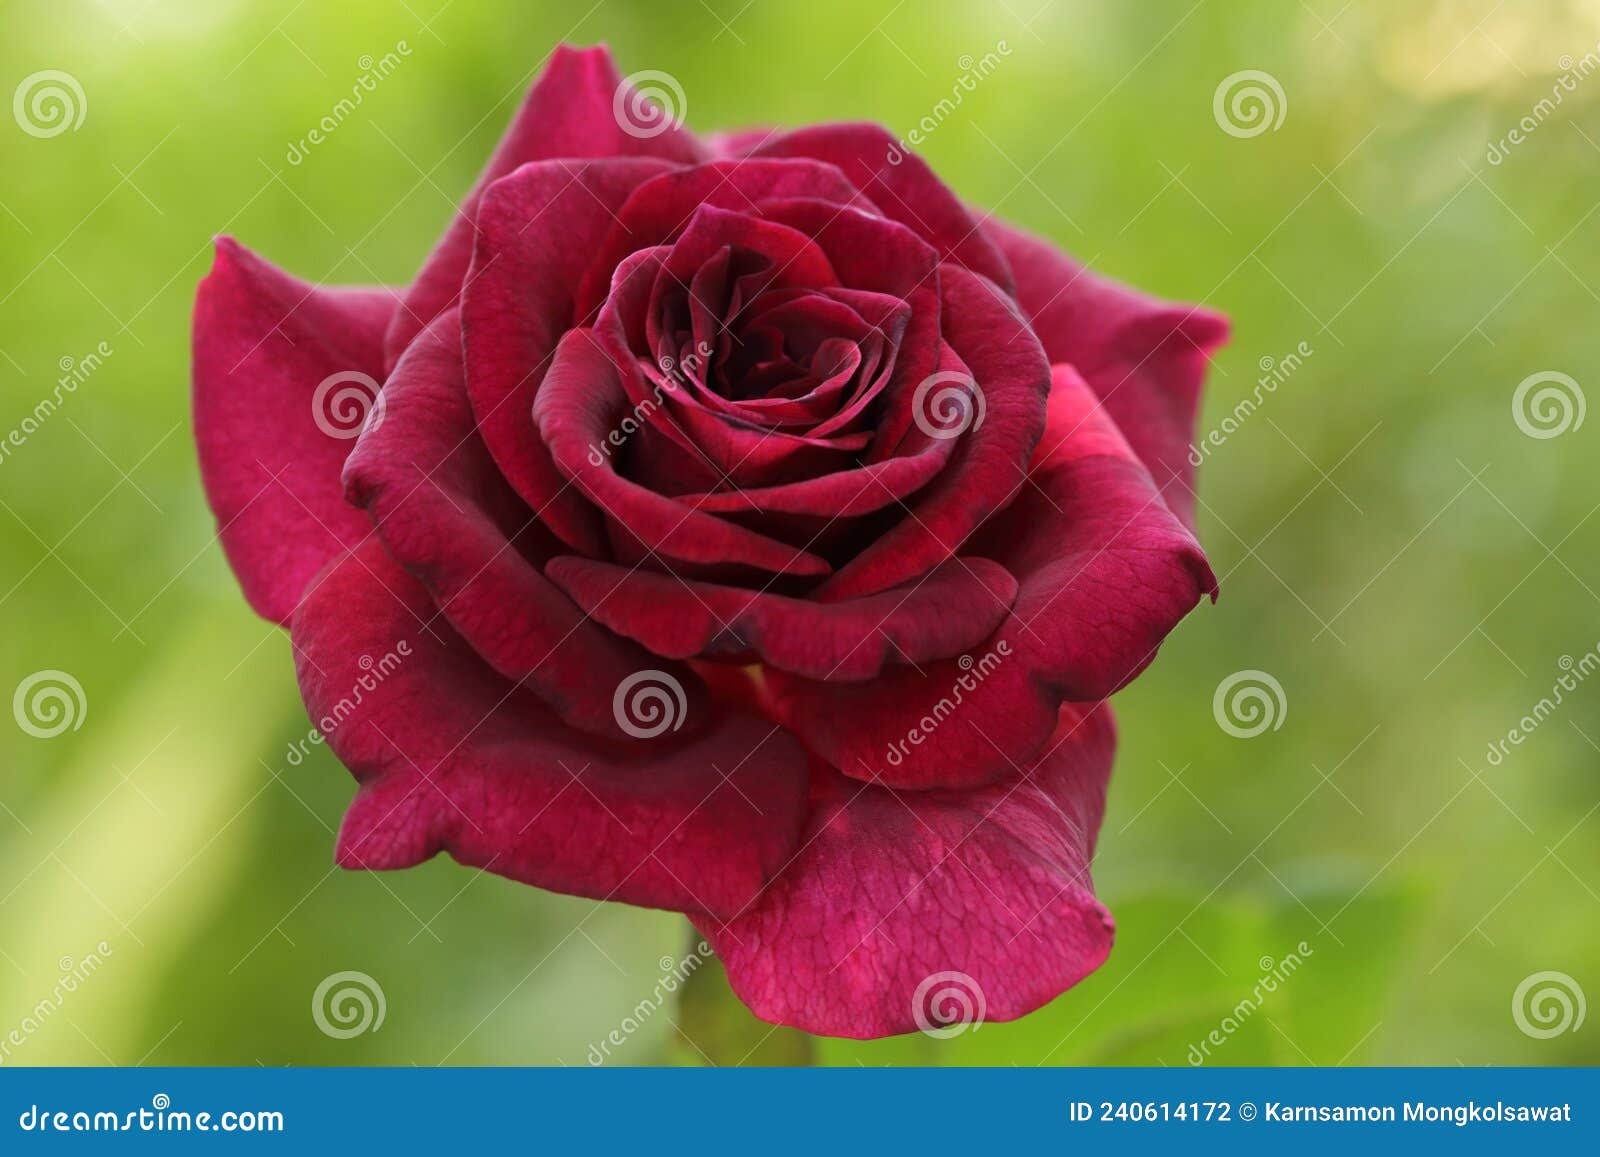 Beautiful Dark Red Rose on Green Nature Background, the Red Roses ...